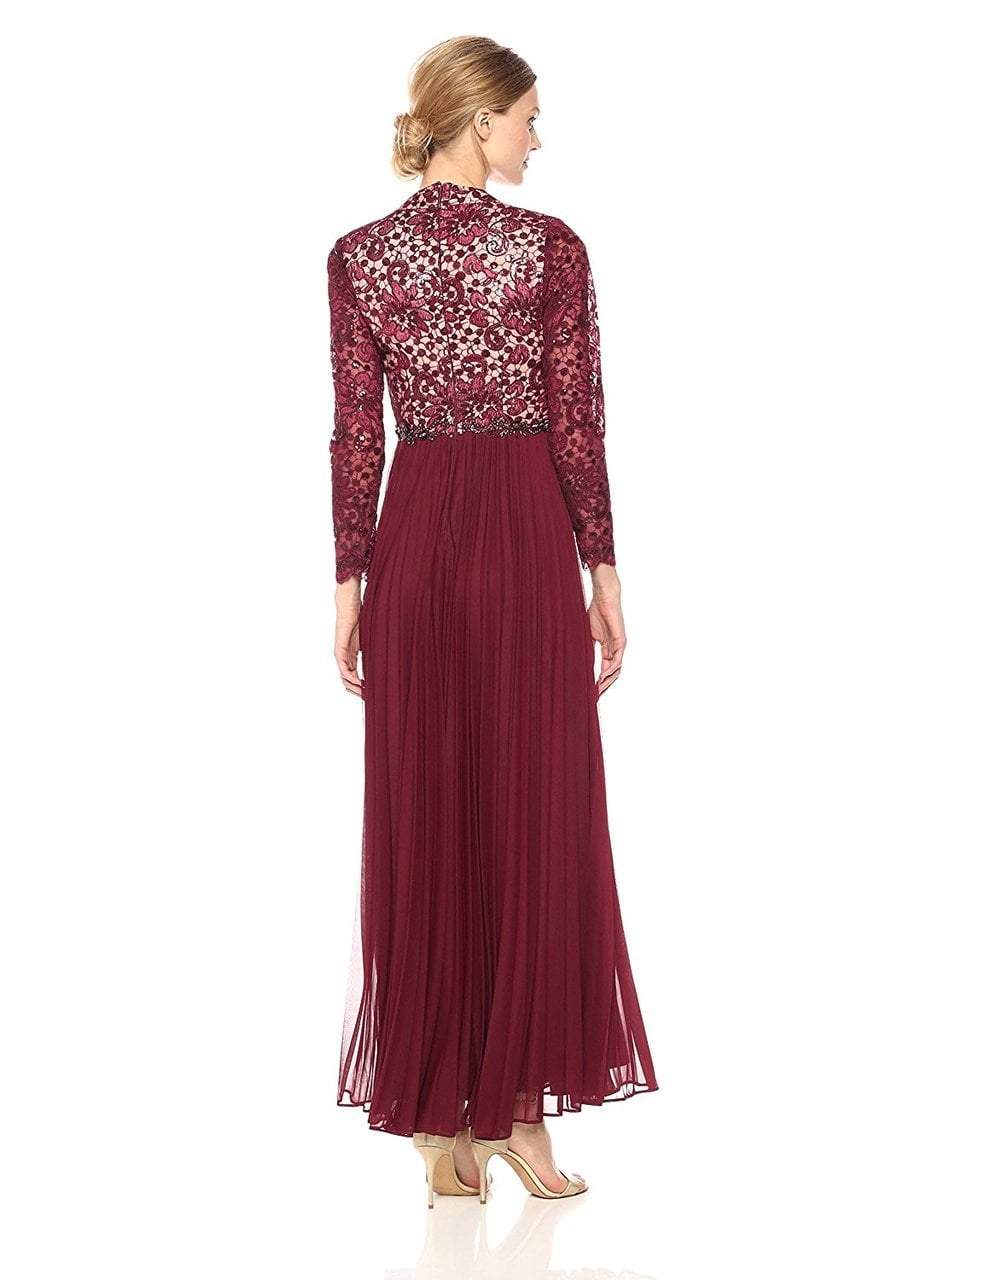 Decode 1.8 - 184210 Floral Lace Embroidered Evening Dress in Red